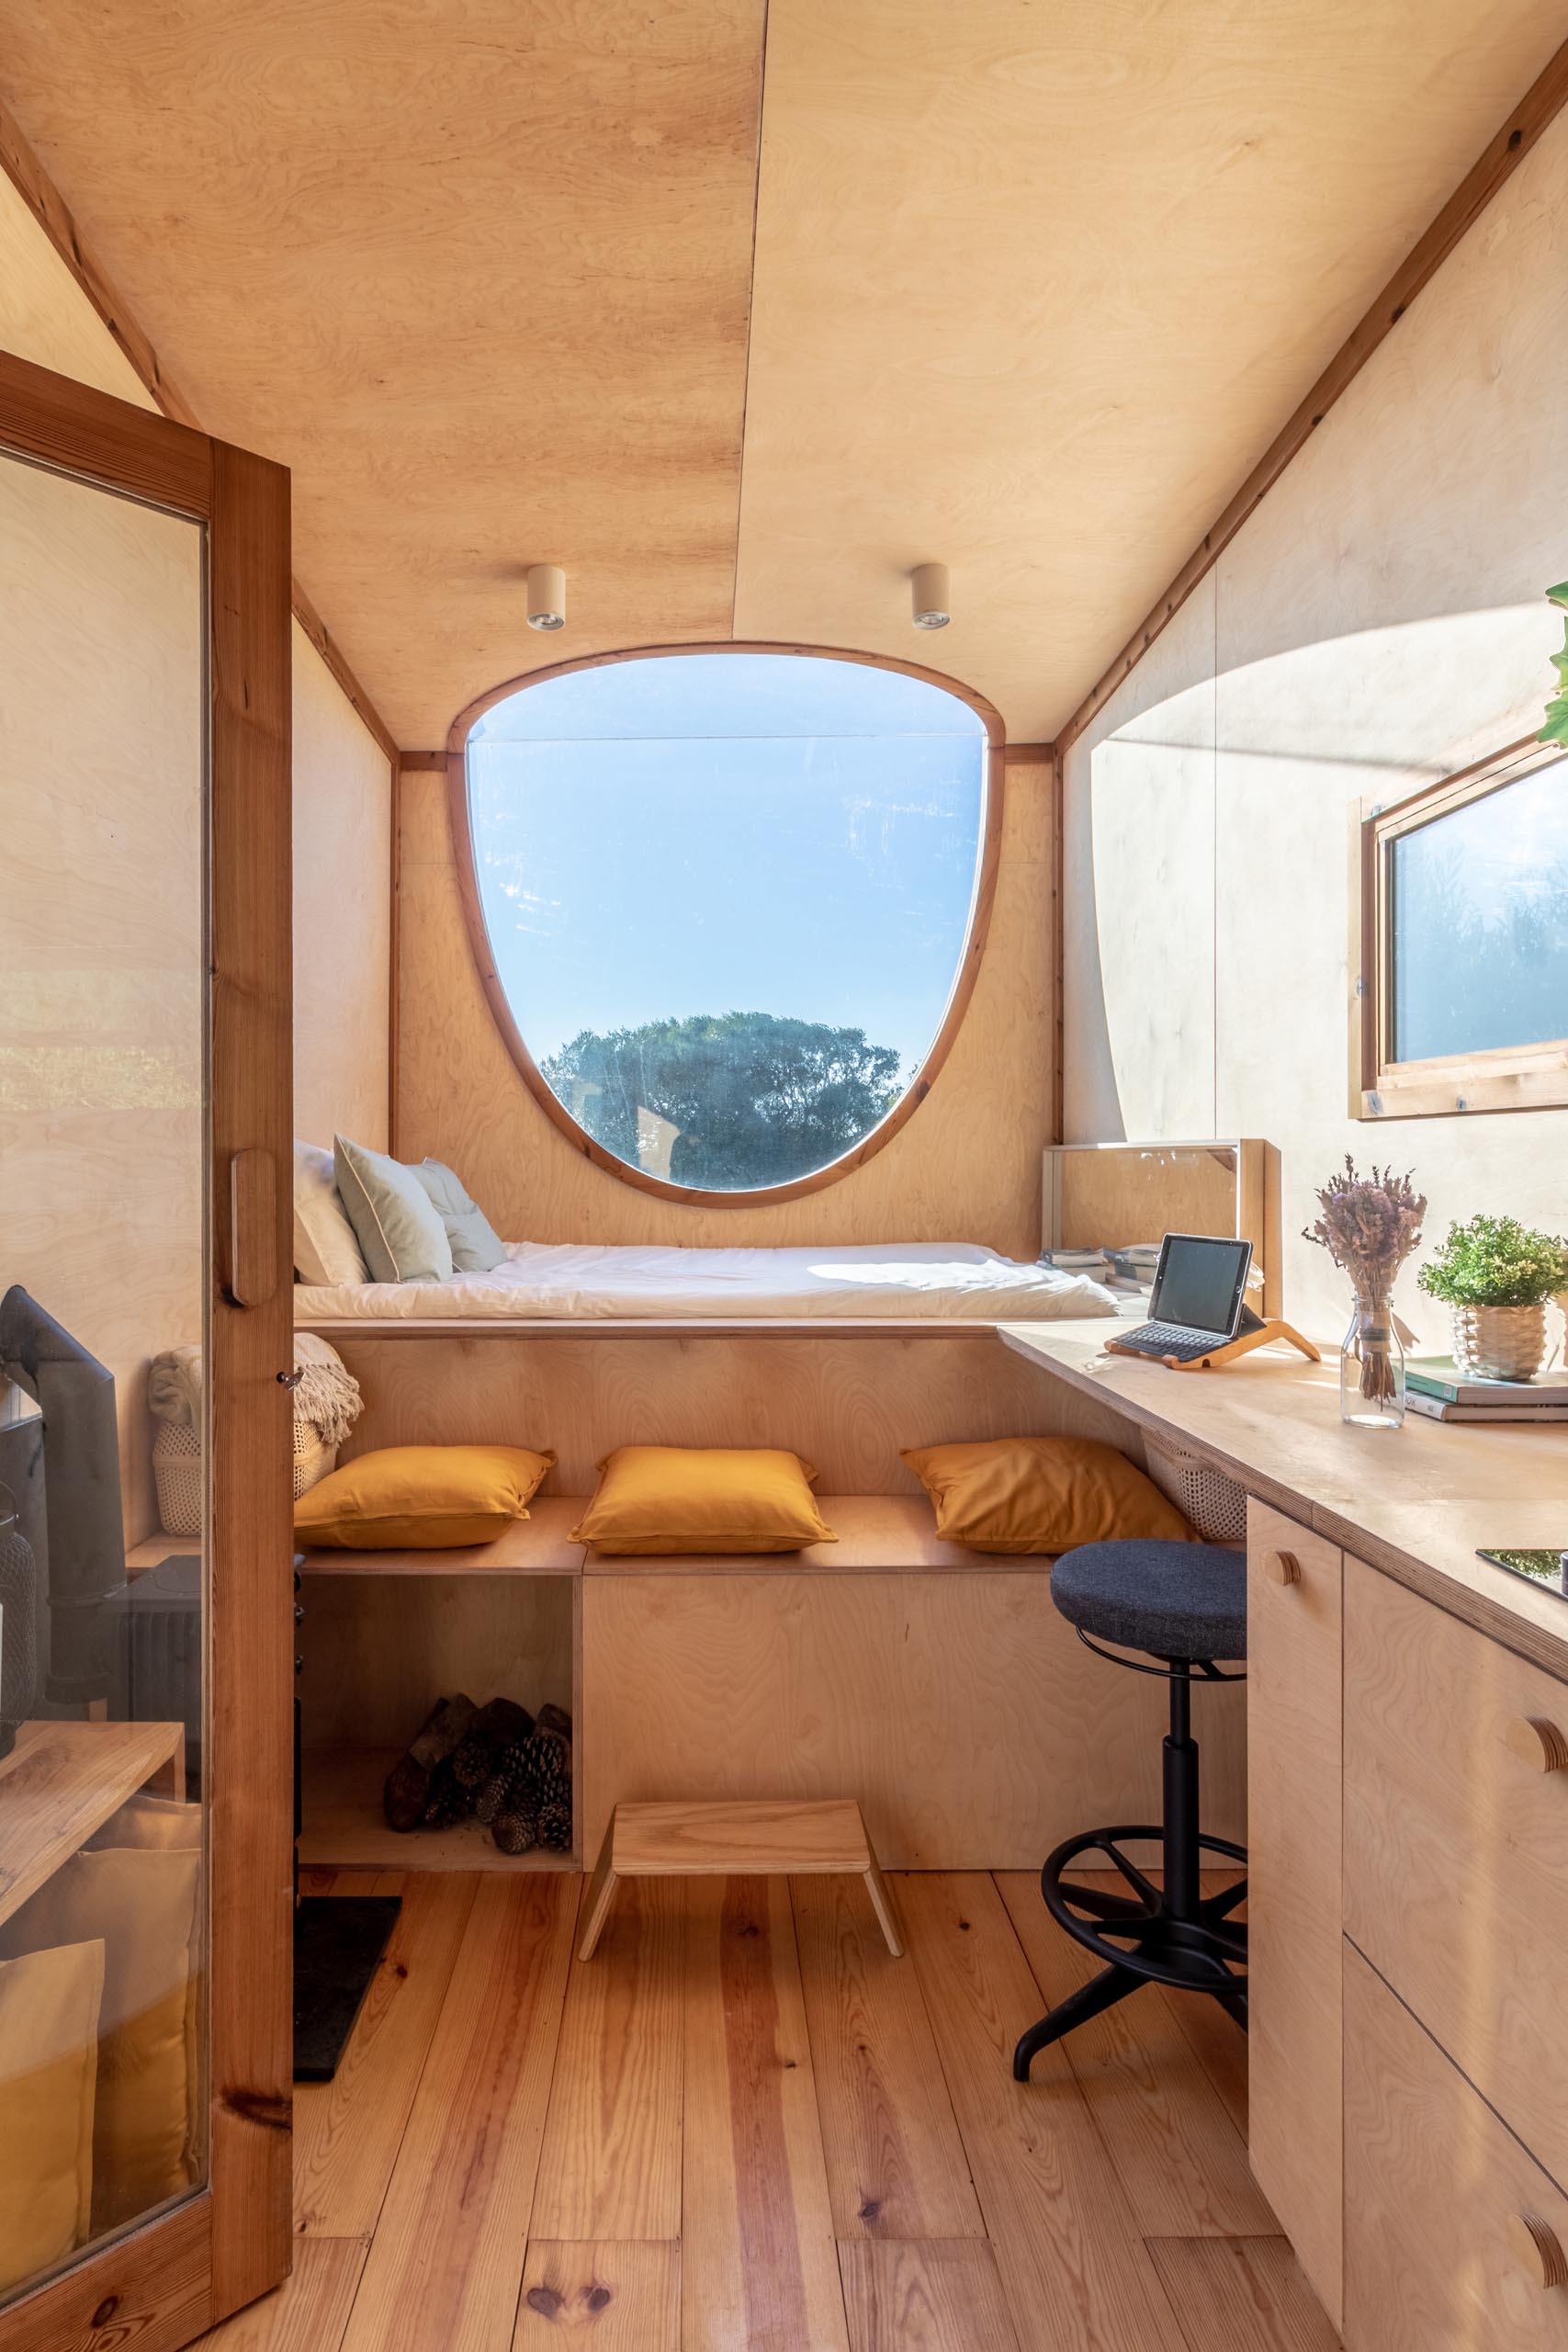 The oval-shaped window in this modern tiny house allows you to have views of the sky whether you're laying in bed or sitting up.